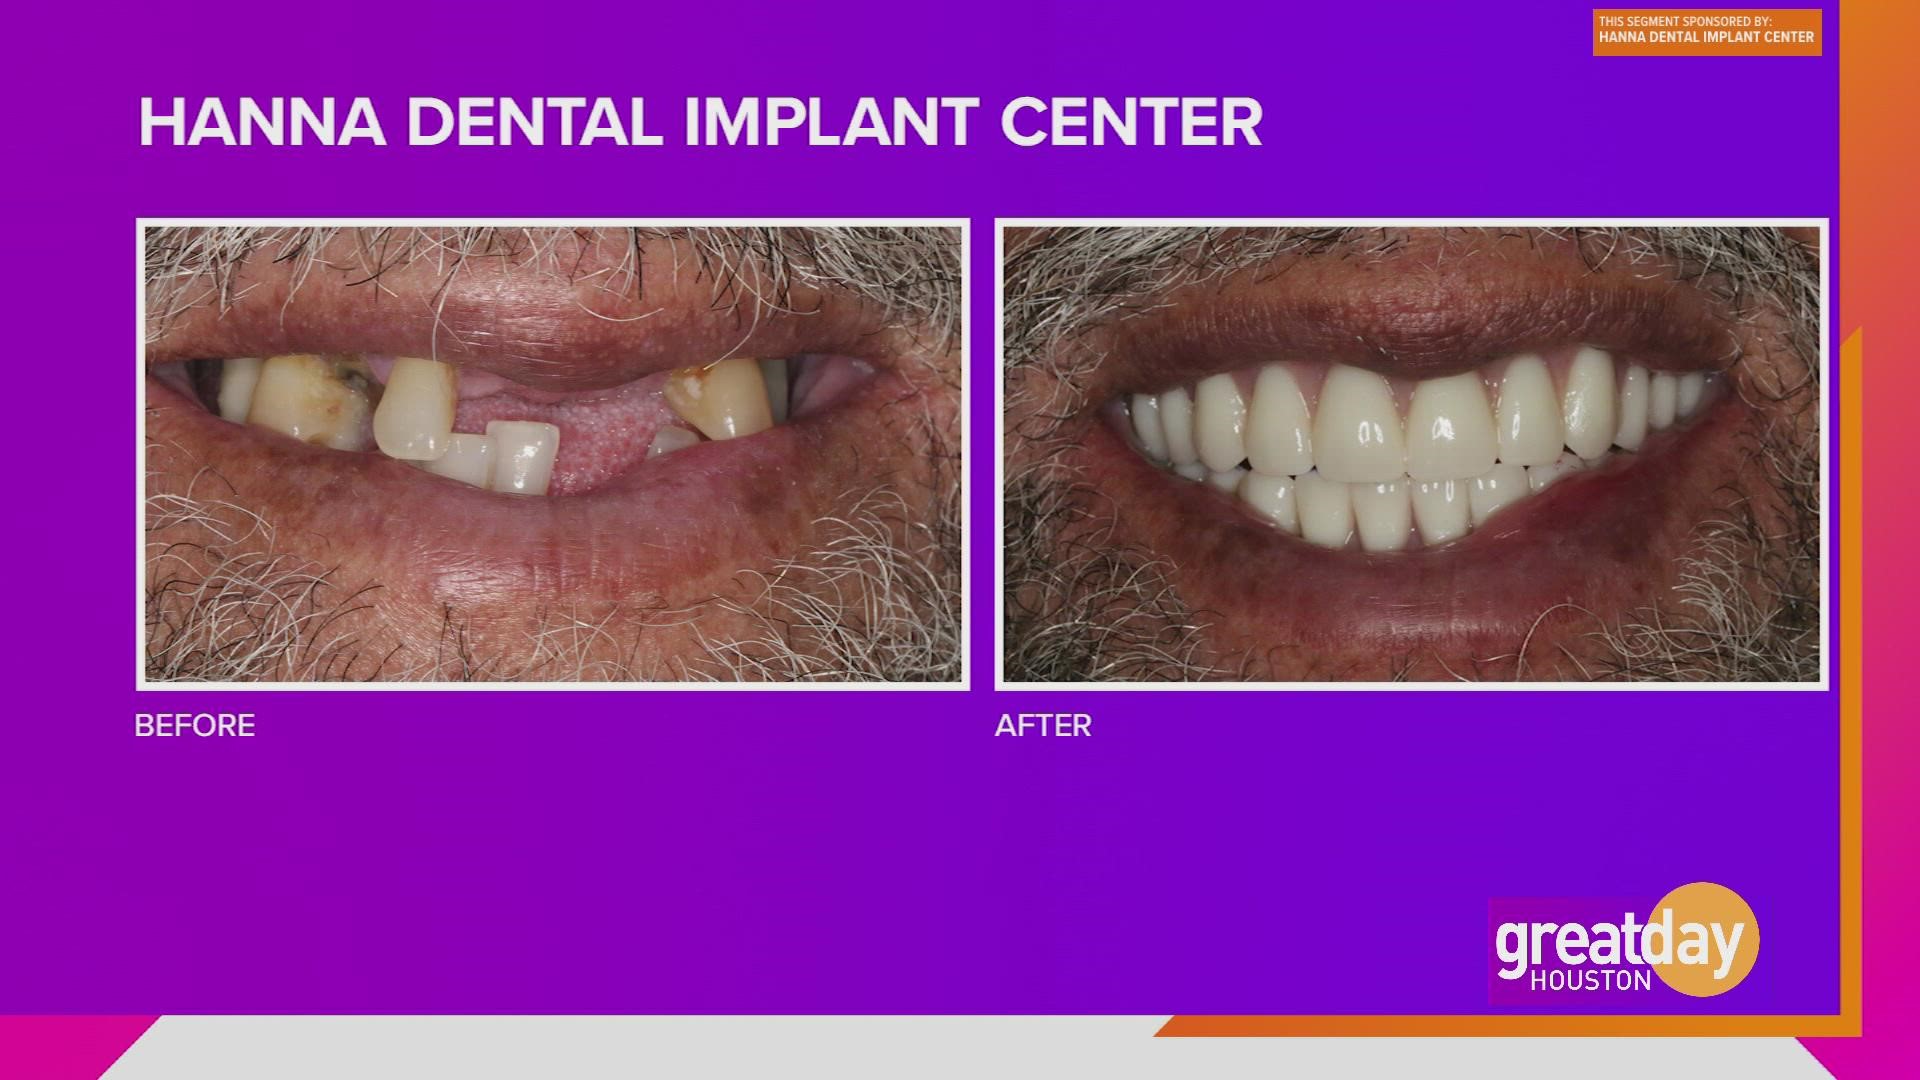 Dr. Raouf Hanna of Hanna Dental Implant Center offers full mouth makeovers